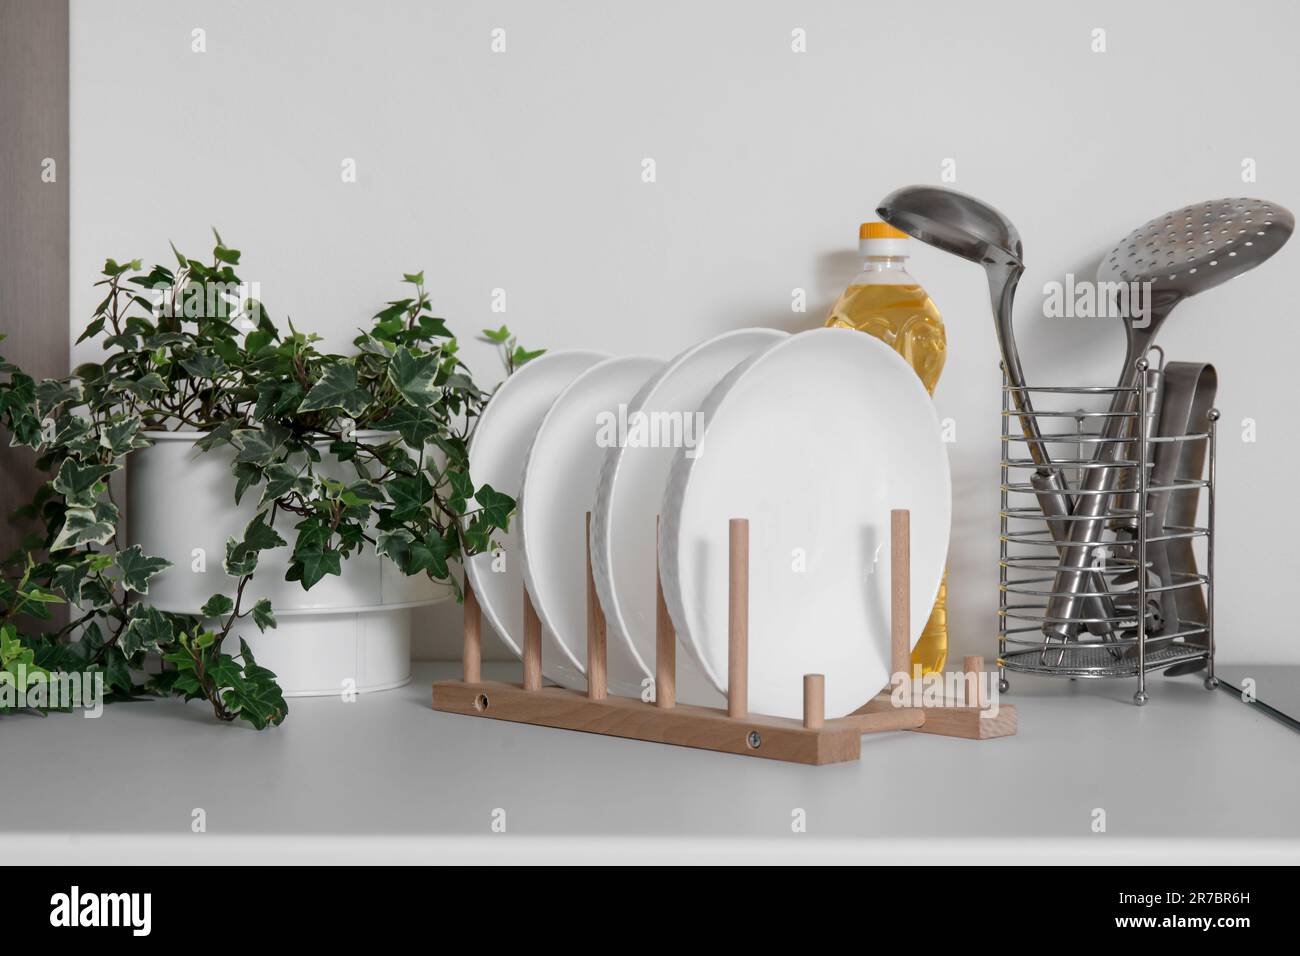 Plate rack, houseplant and utensils on white kitchen counter, closeup Stock Photo